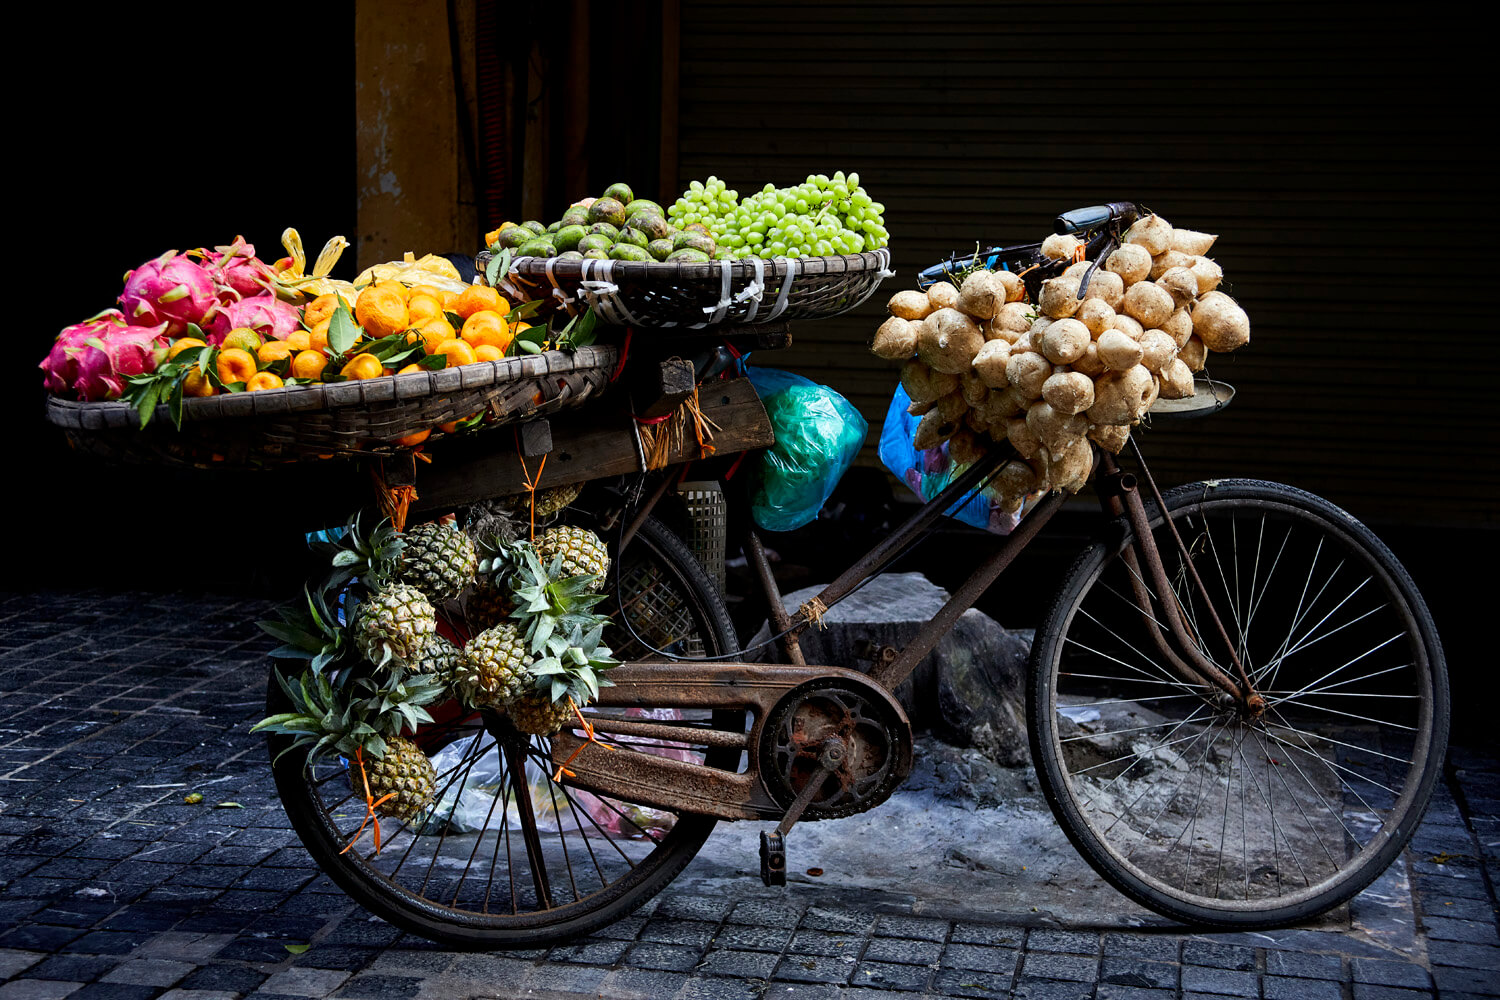 This image features a laden bicycle, standing as a makeshift market stall, against a dark background. The bike is heavily adorned with an assortment of colourful fruits: dragon fruits, bananas, grapes, and pineapples, with bunches of white bulbs hanging from the handlebar.